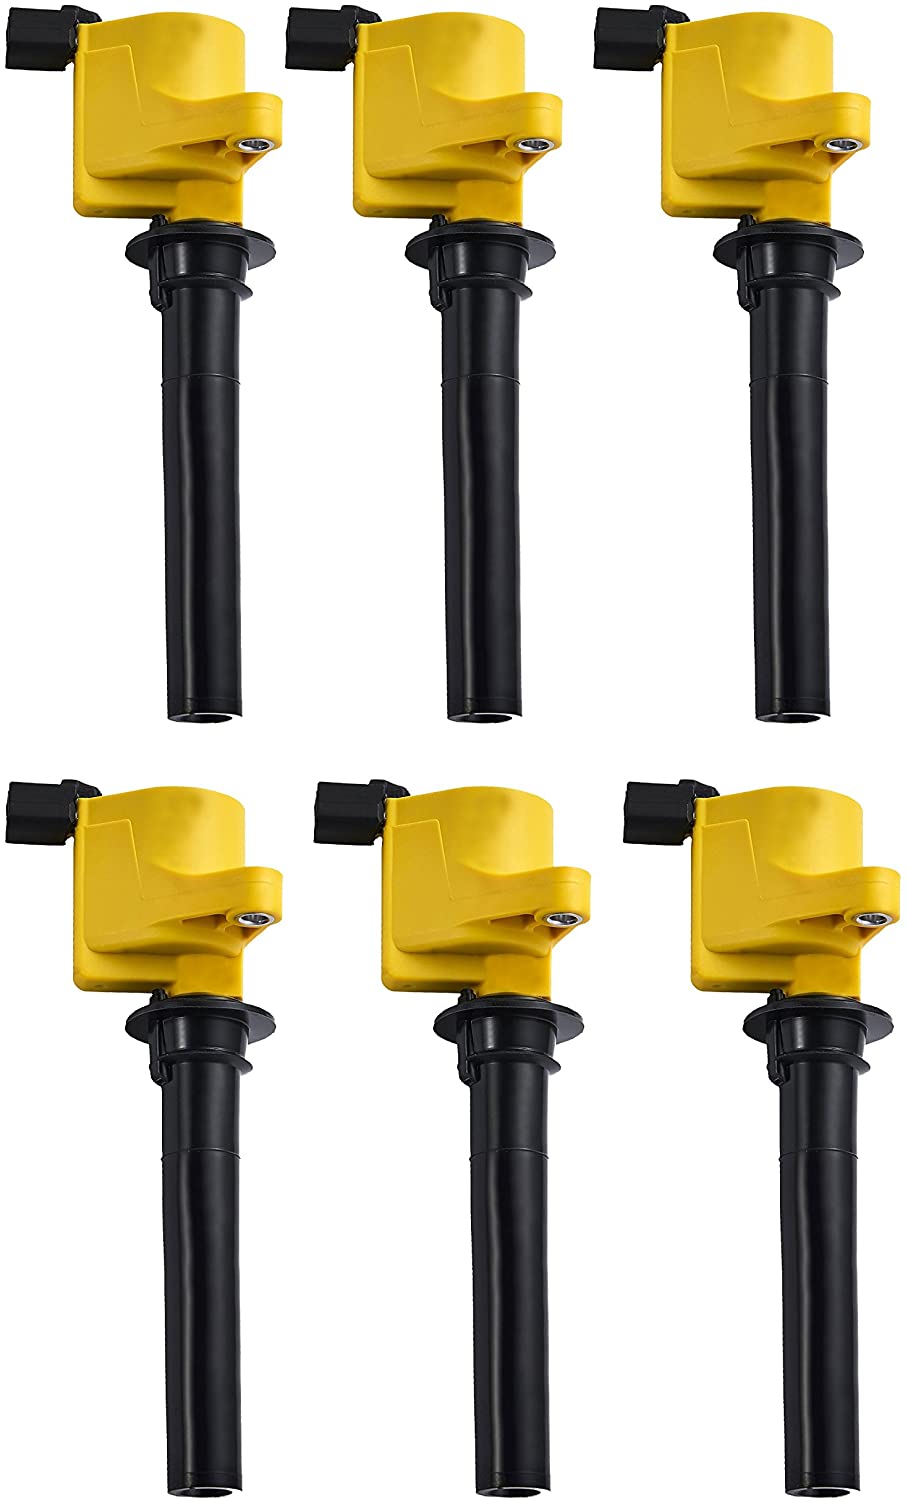 ENA Heavy Duty Ignition Coil 6 Pack Compatible with 01-08 Ford Escape Five Hundred Freestyle Taurus - Mazda Tribute - Mercury Mariner Montego Sable 3.0L V6 (6)